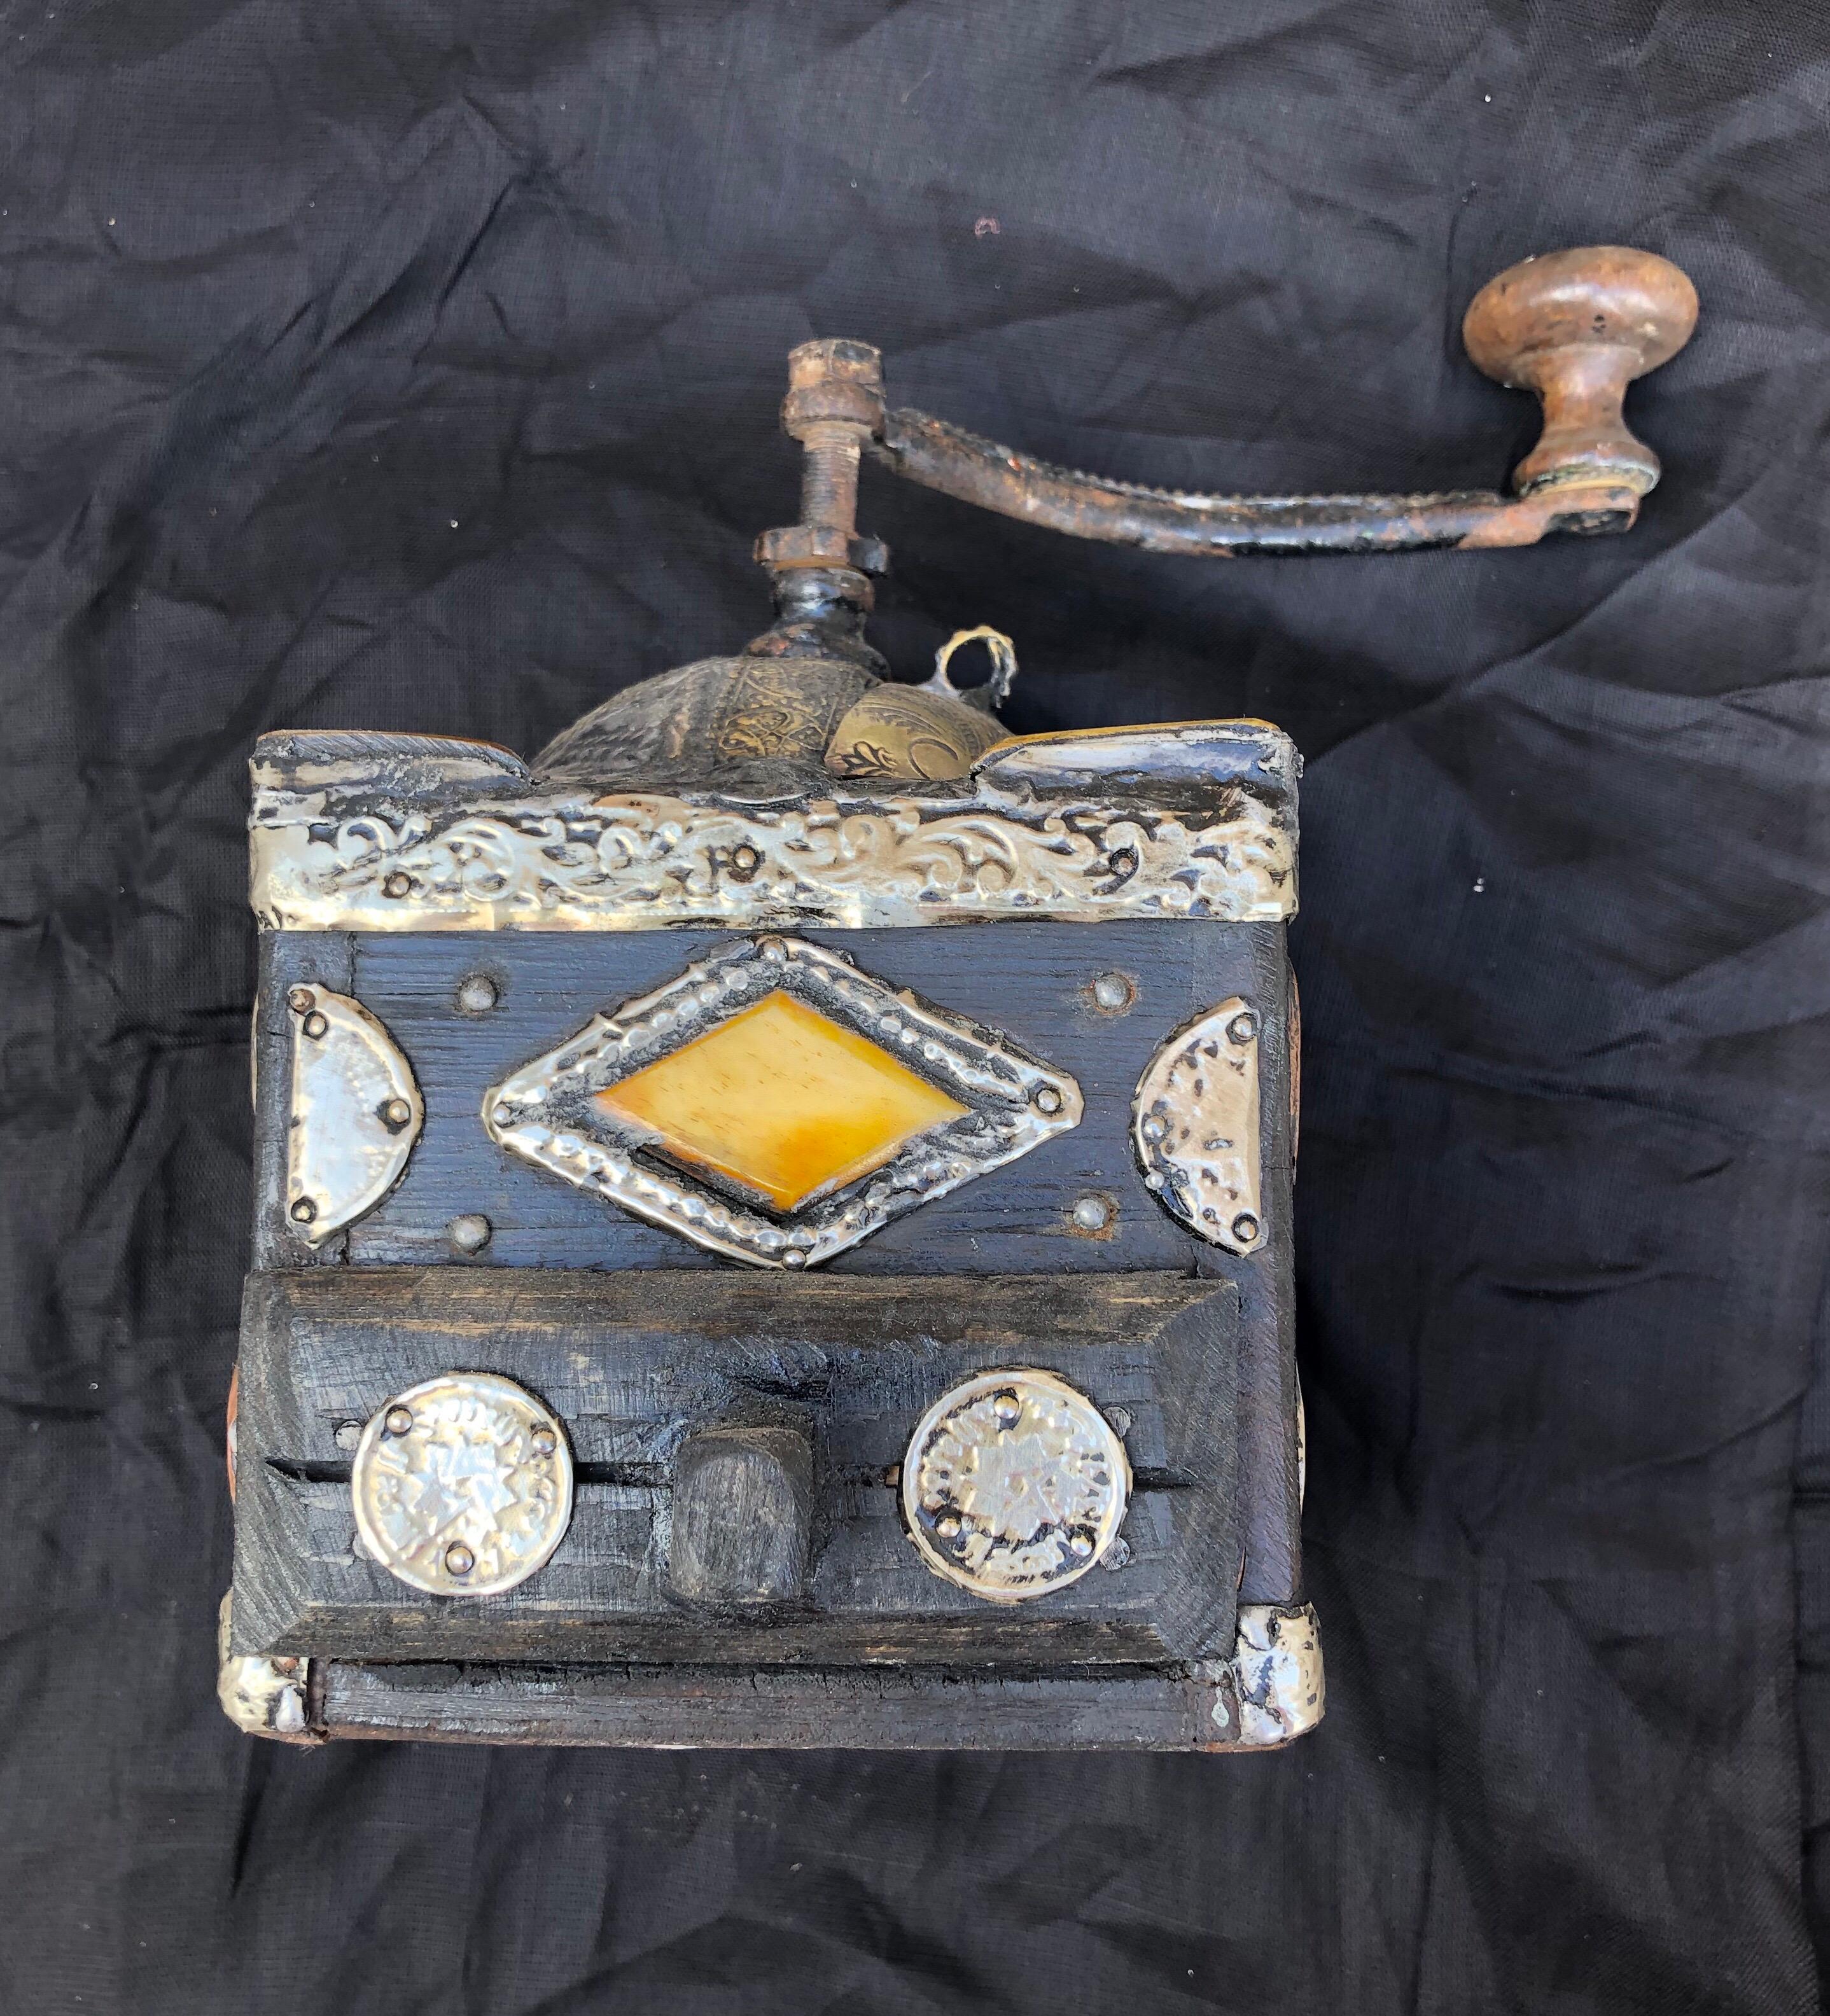 This antique hand-crank grinder is made of tamarisk wood, with hand-engraved silver melange adornment, hand carved embellishments, and numerous antique coins. Entirely handmade, this grinder was used by southern Morocco nomads while traveling and